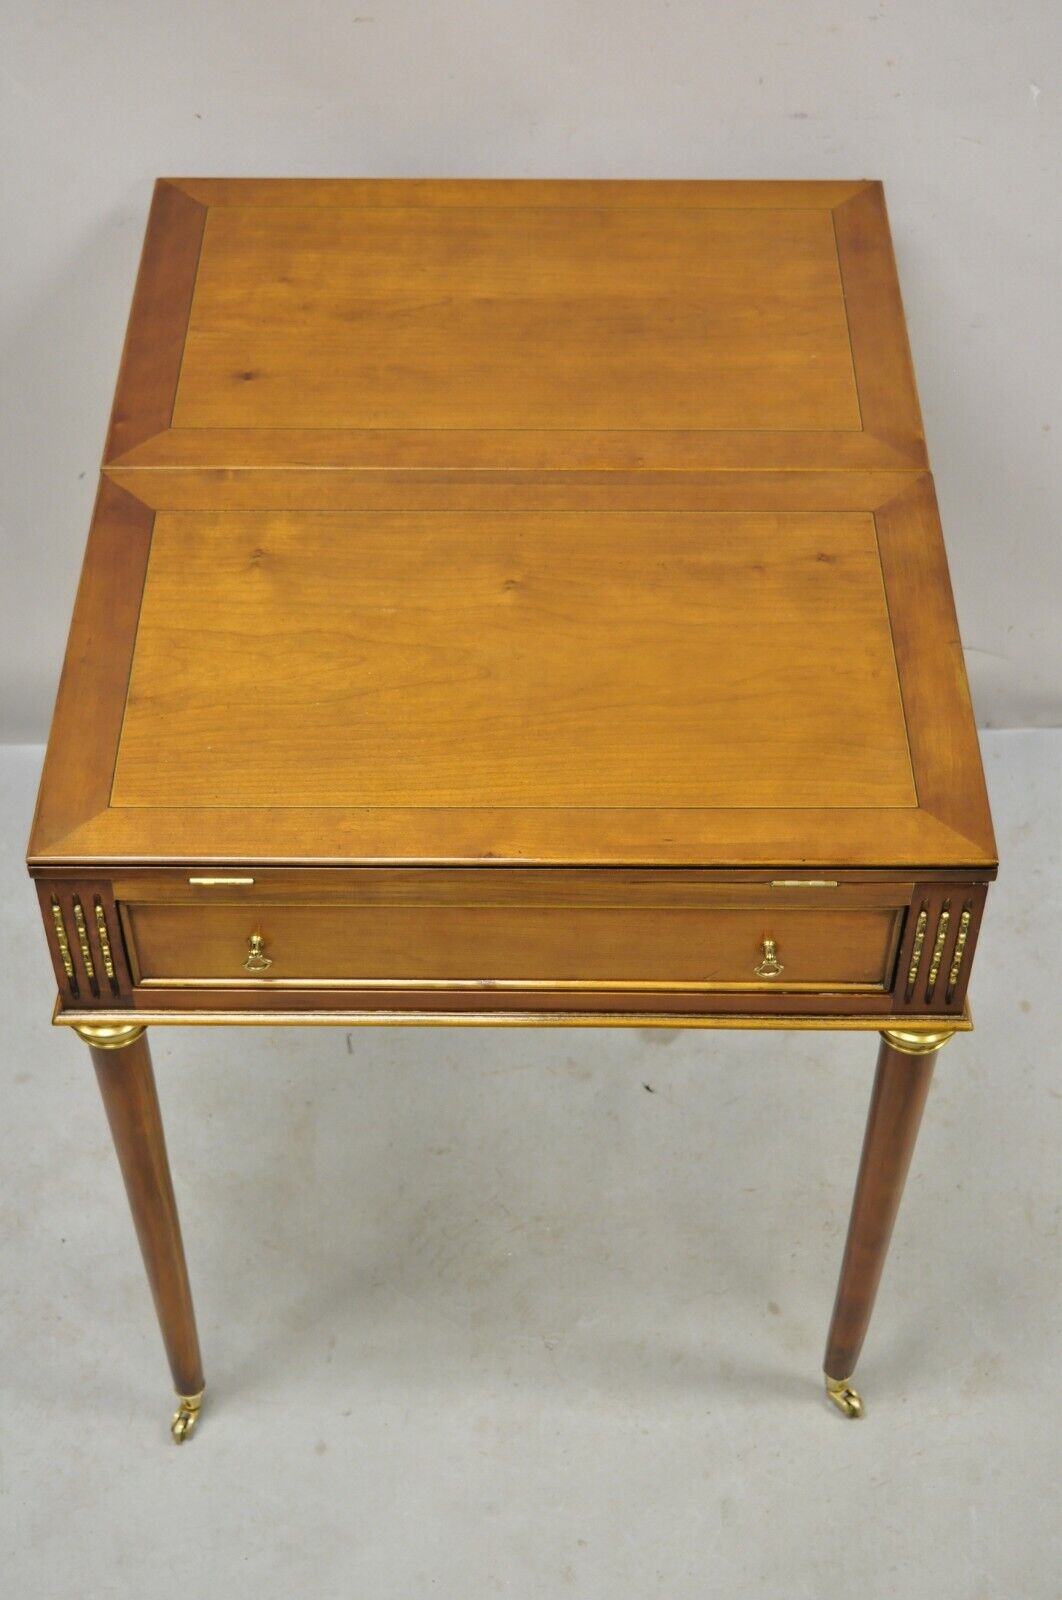 French Louis XVI Style Cherry Wood Flip Top Game Table With Brass Wheels